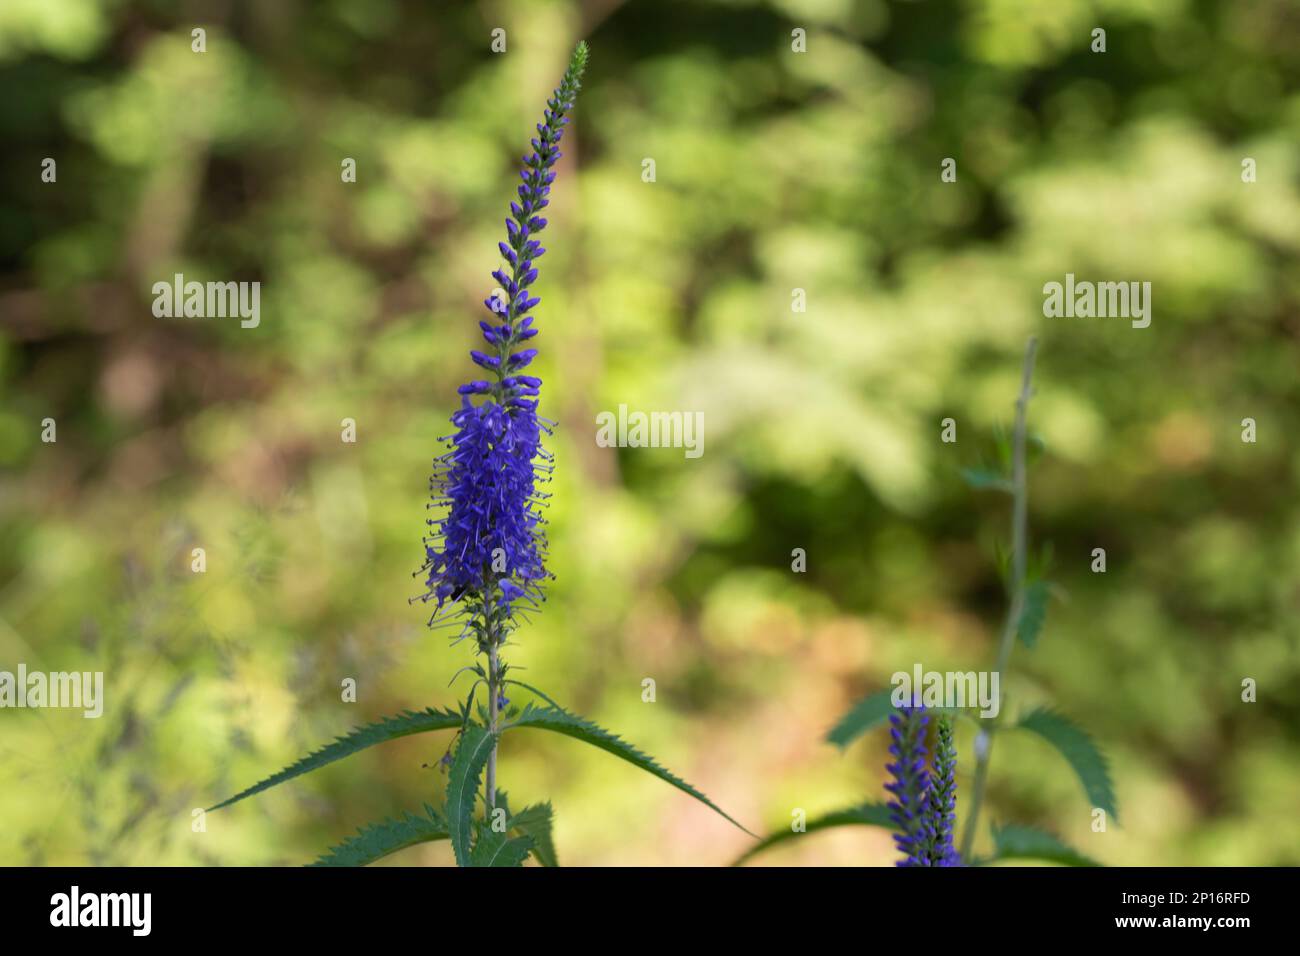 Flowering plant of Veronica Longifolia, known as garden speedwell or longleaf speedwell, in the garden. Stock Photo